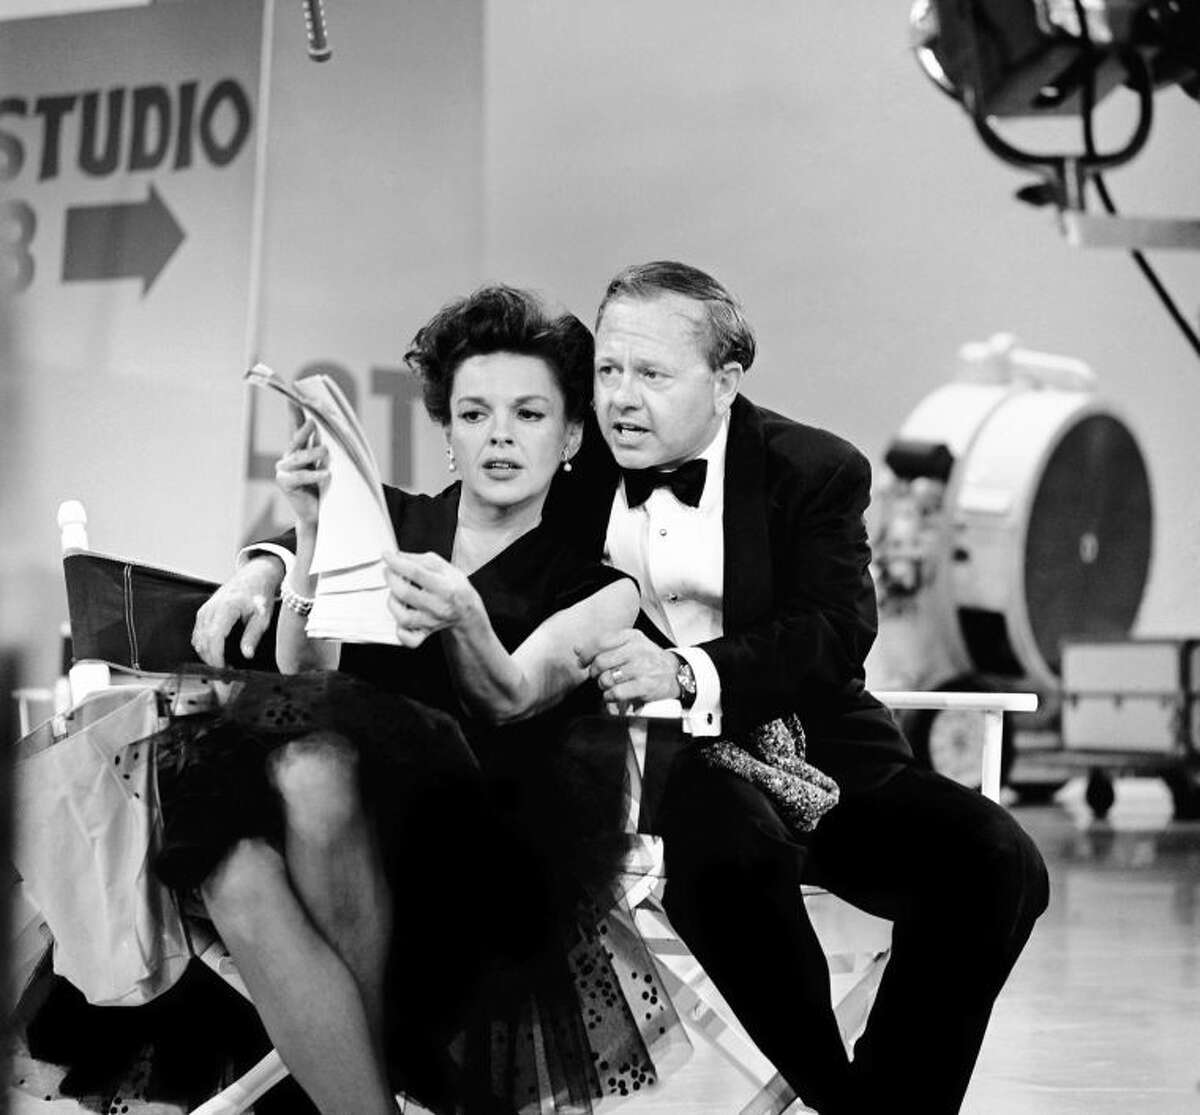 FILE - In this June 26, 1963, file photo, Judy Garland and Mickey Rooney put their heads together over a television script for their first onstage reunion in 18 years, for the taping of the first of 32 variety shows which Garland will do for CBS next season. Rooney, a Hollywood legend whose career spanned more than 80 years, has died. He was 93. Los Angeles Police Commander Andrew Smith said that Rooney was with his family when he died Sunday, April 6, 2014, at his North Hollywood home. (AP Photo/File)